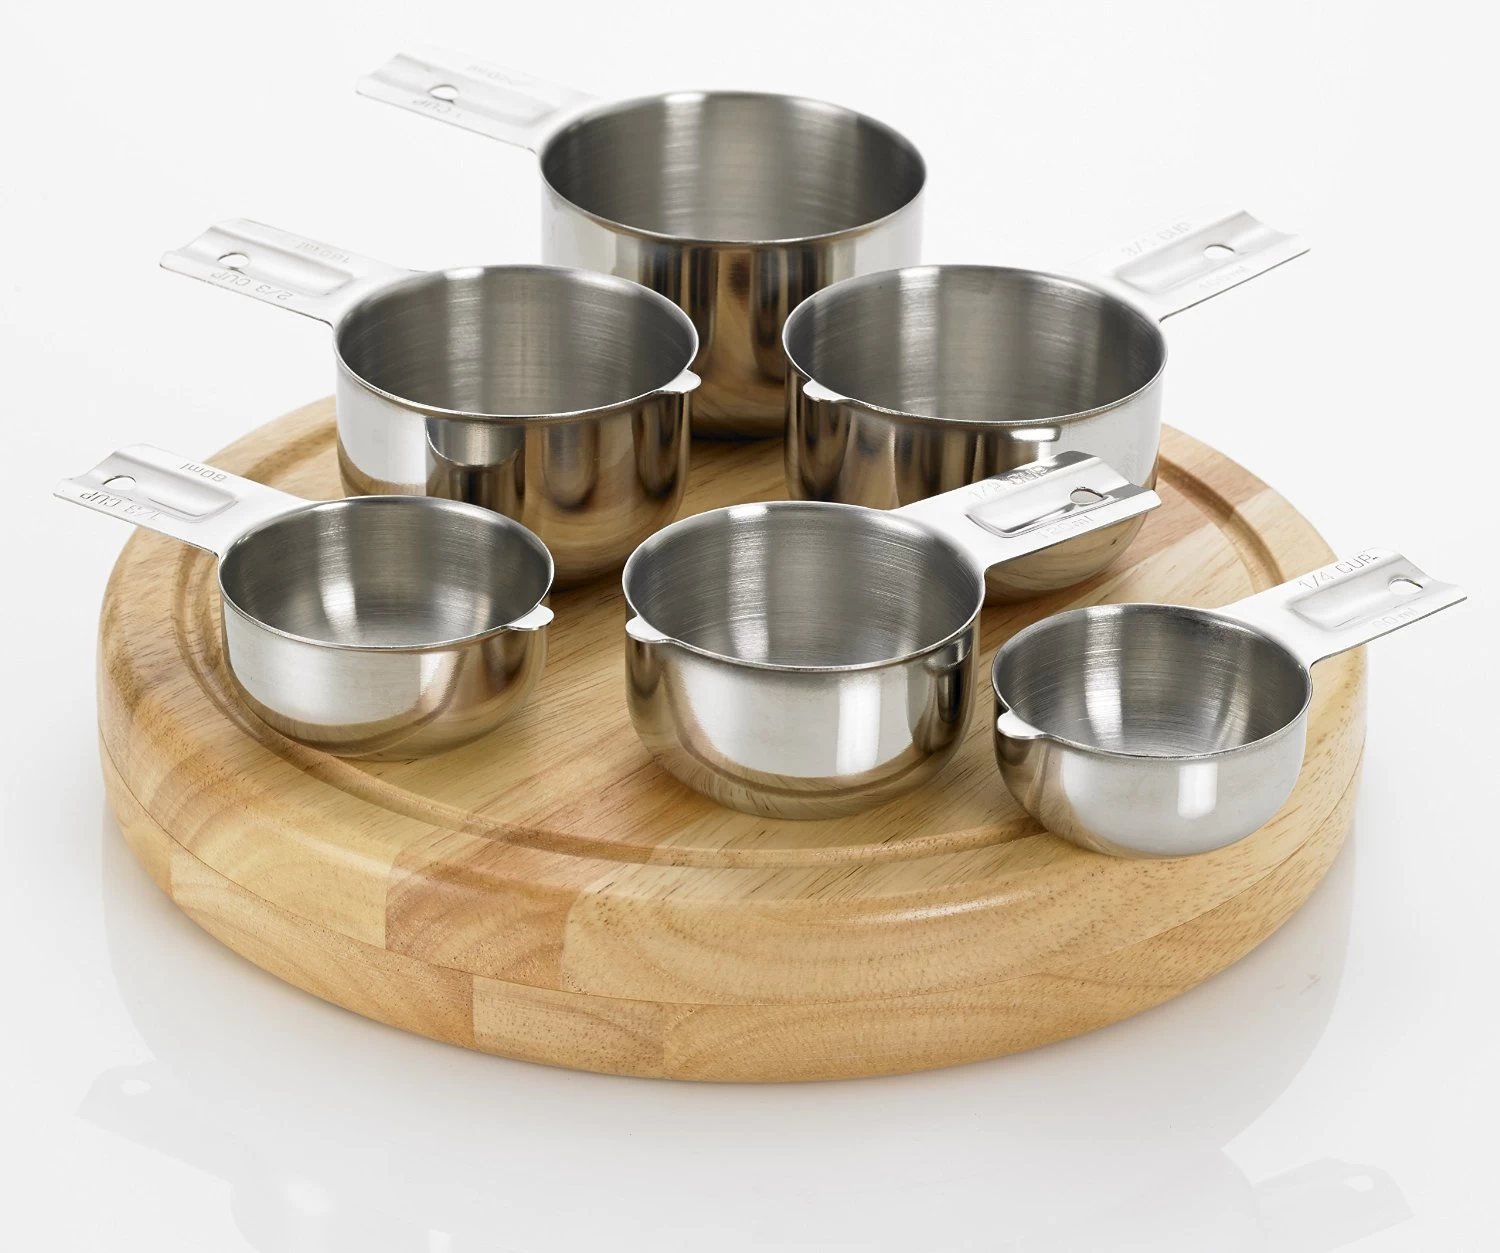 Stainless Steel Measuring Cup Set 6 Piece come from Stainless Steel Ice Cream Scooptrading company